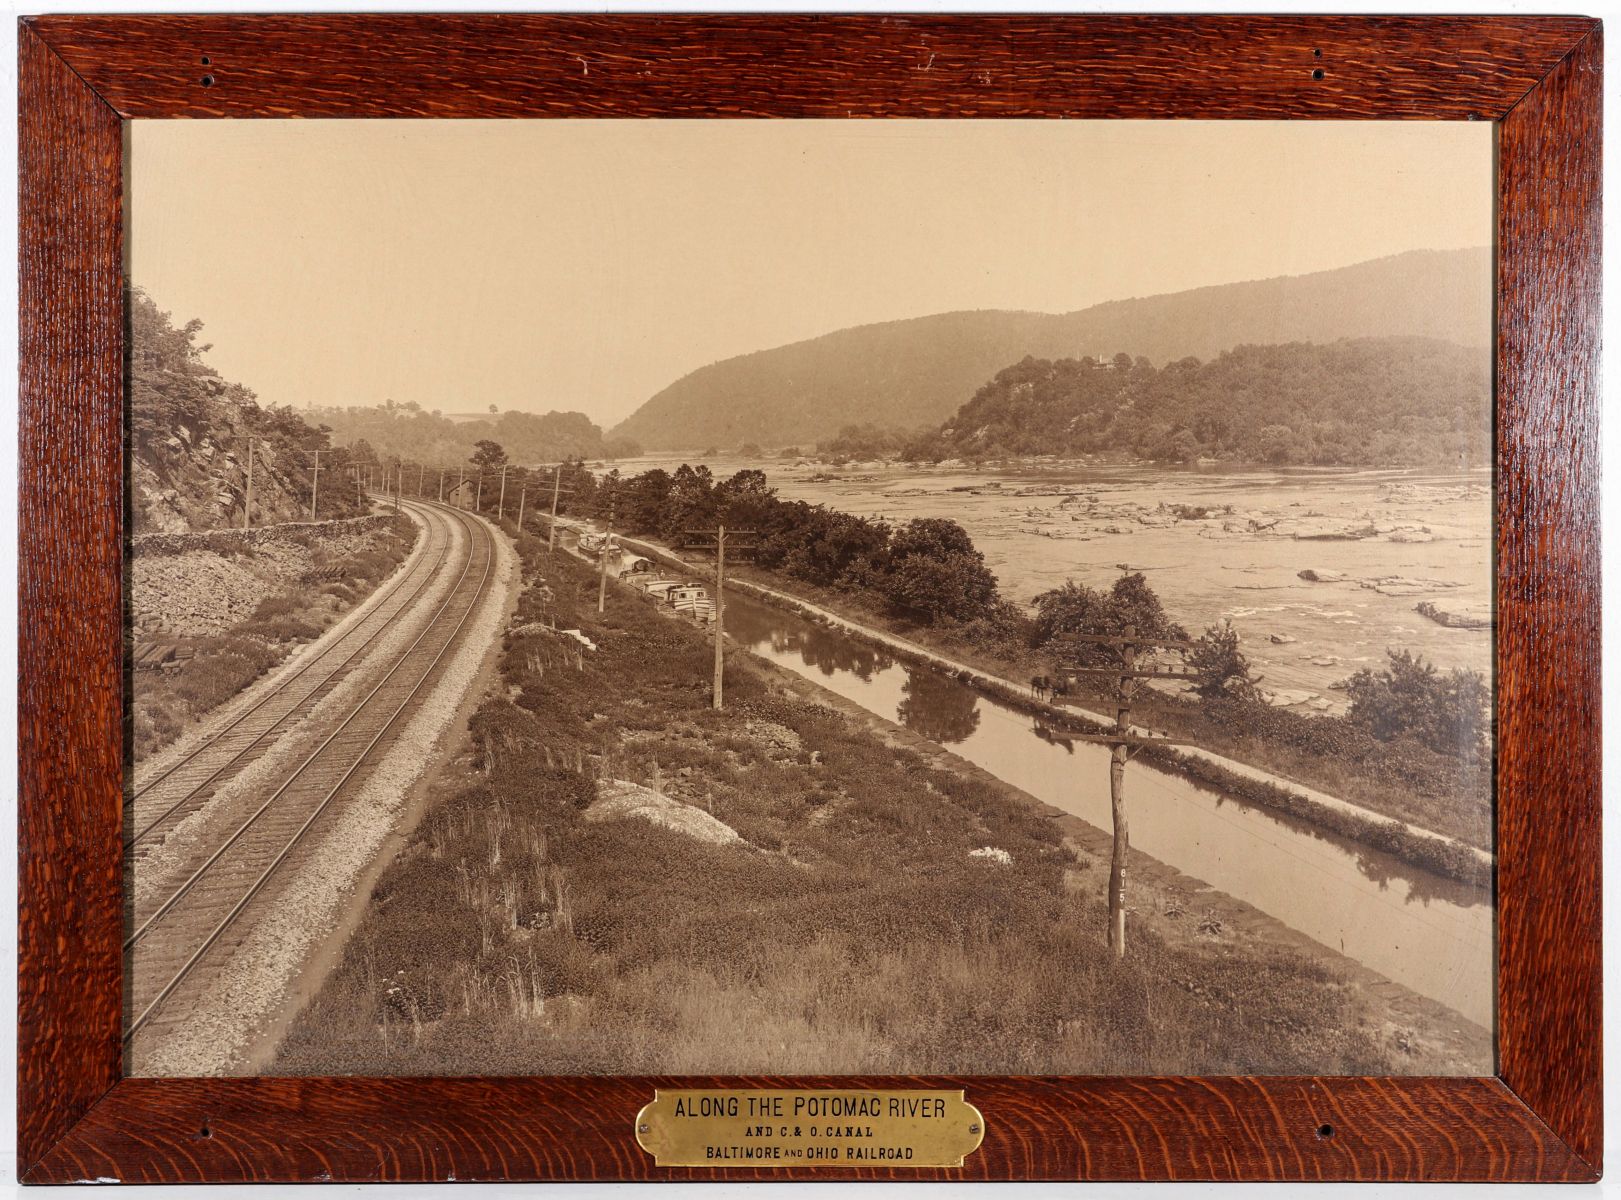 A PHOTOGRAVURE VIEW ALONG THE POTOMAC RIVER ON THE B&O